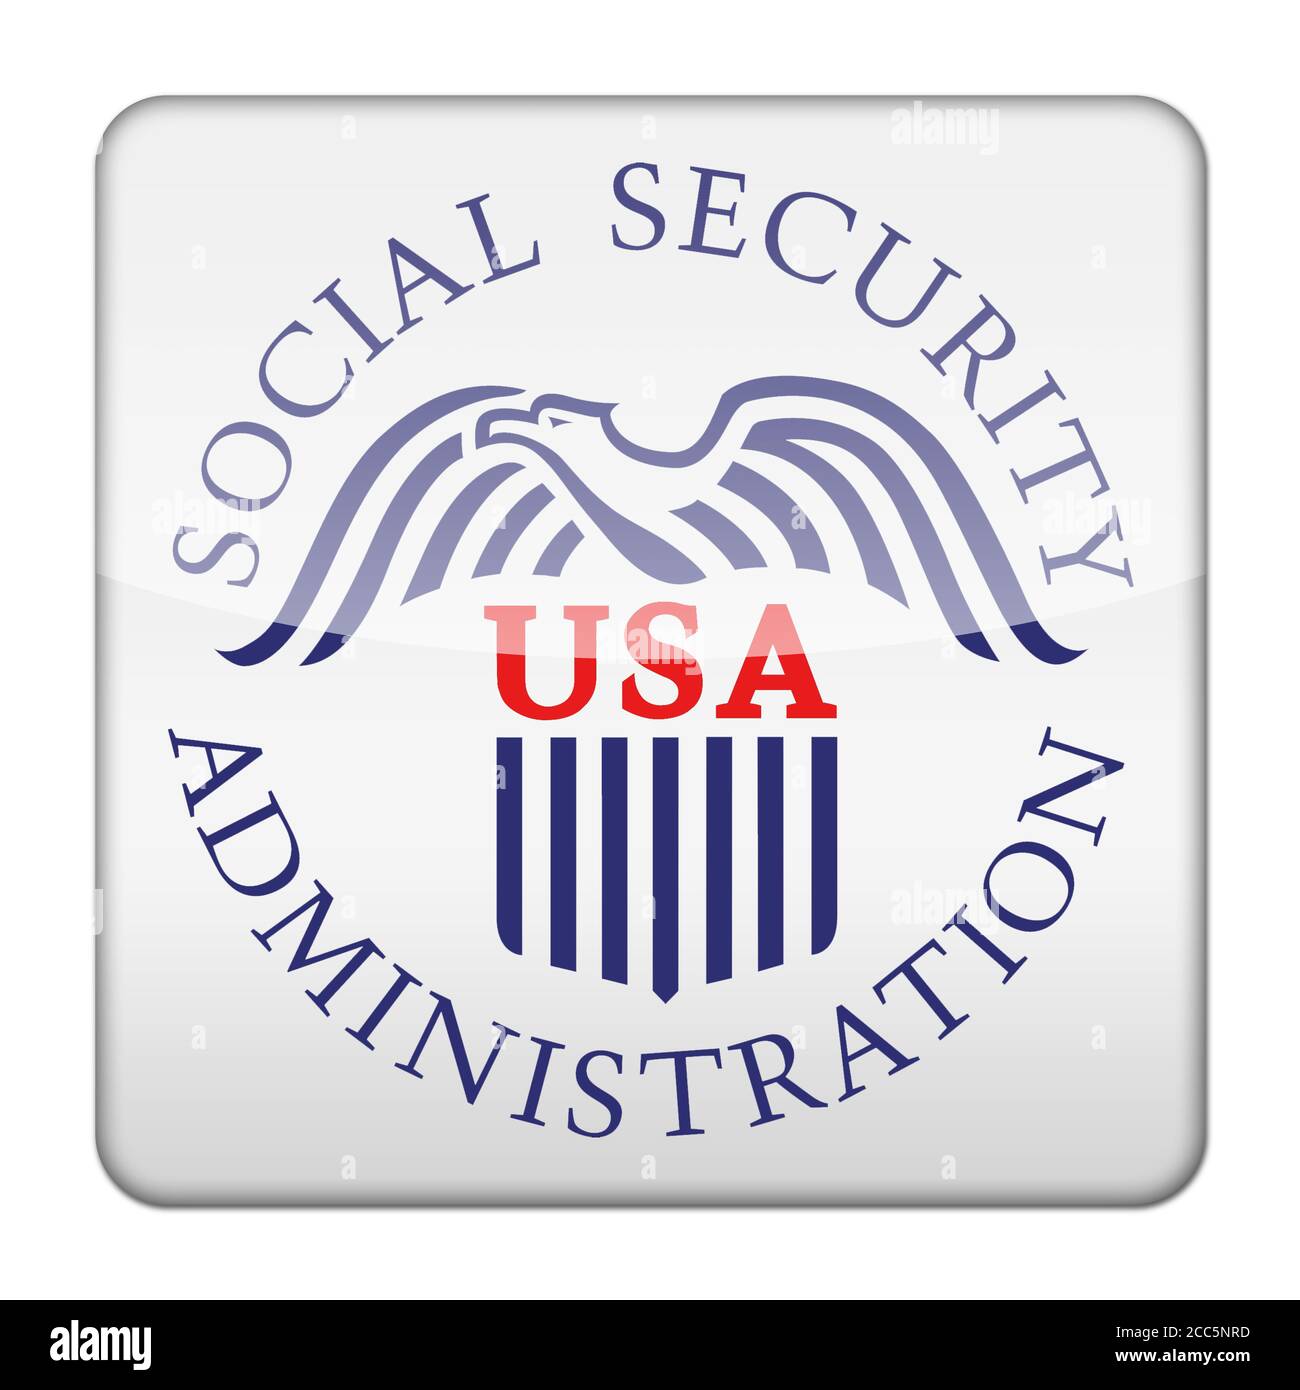 Social Security Administration Stockfoto